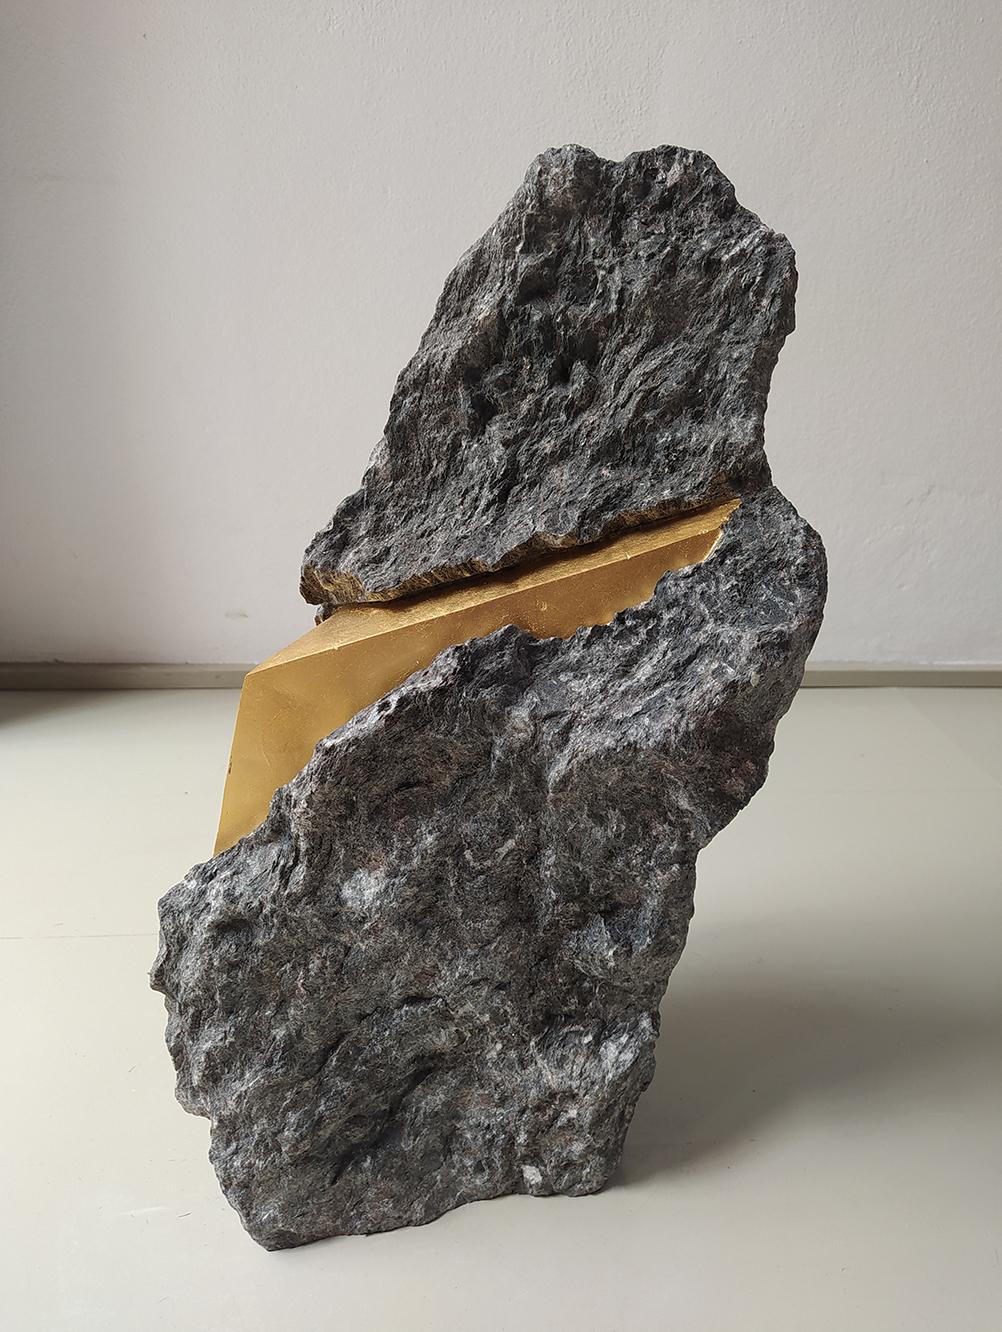 SW6 is a unique sculpture by contemporary artist Mattia Bosco. This sculpture is made of Black Palissandro marble and gold leaf, dimensions are 49 × 30 × 16 cm (19.3 × 11.8 × 6.3 in). 
This sculpture is a unique piece and comes with a certificate of